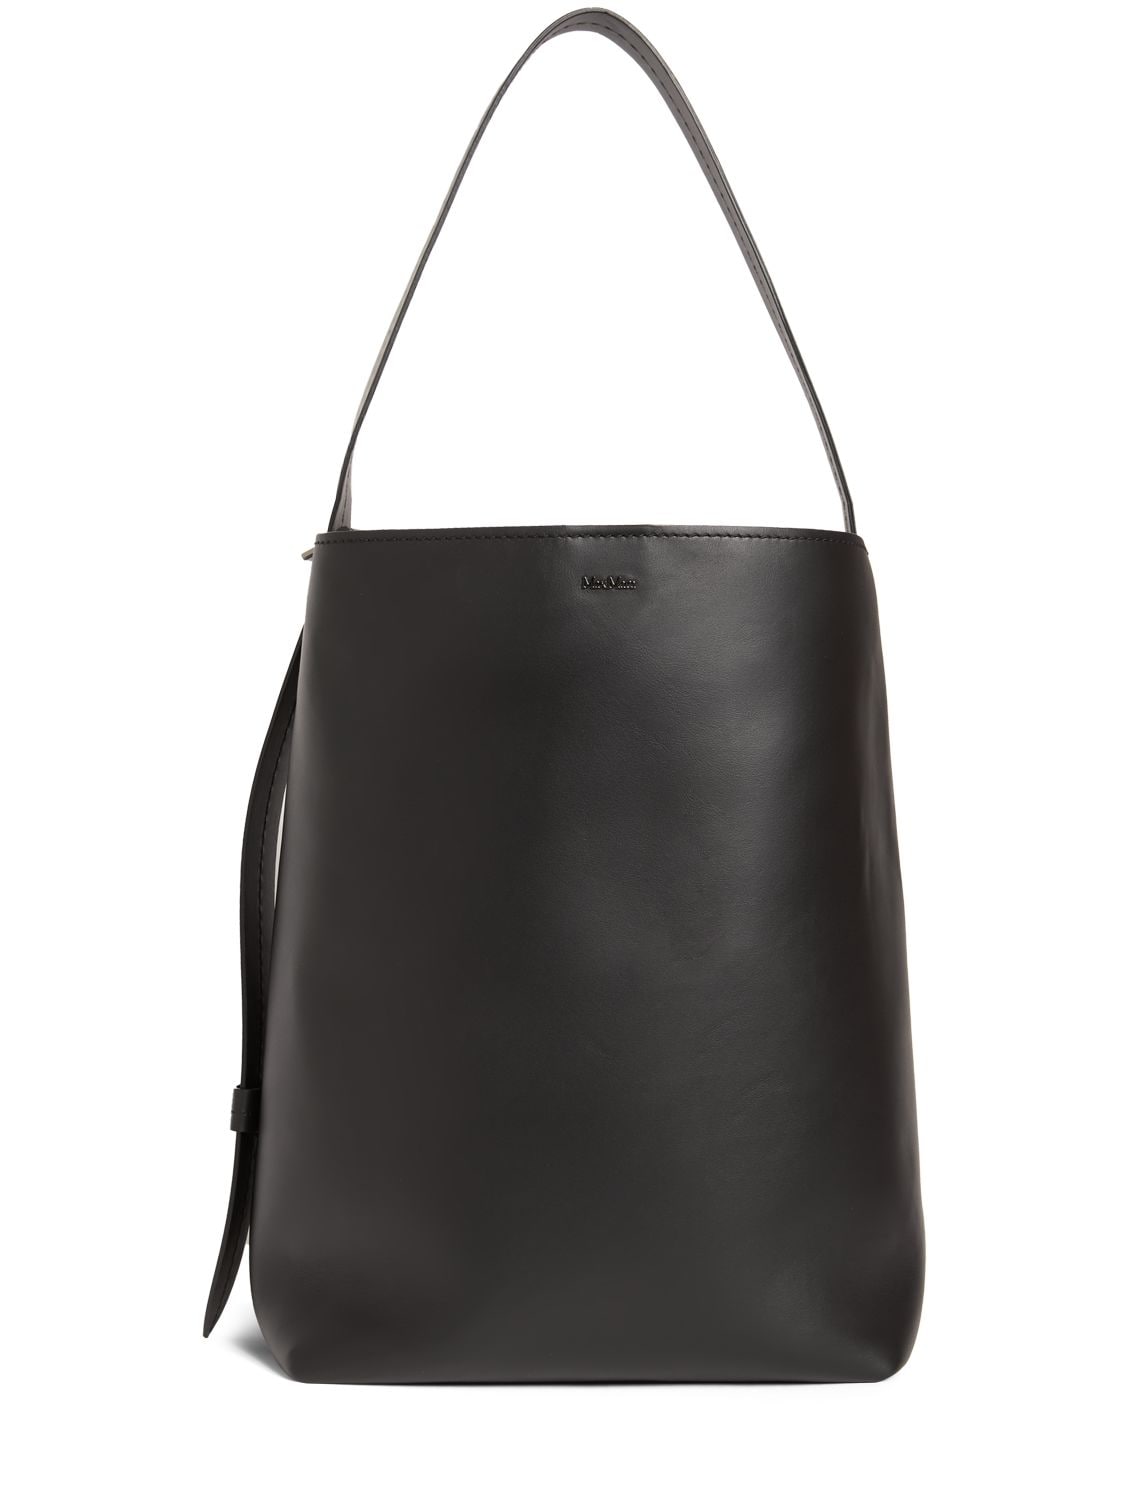 Image of Archetipo1 Leather Tote Bag